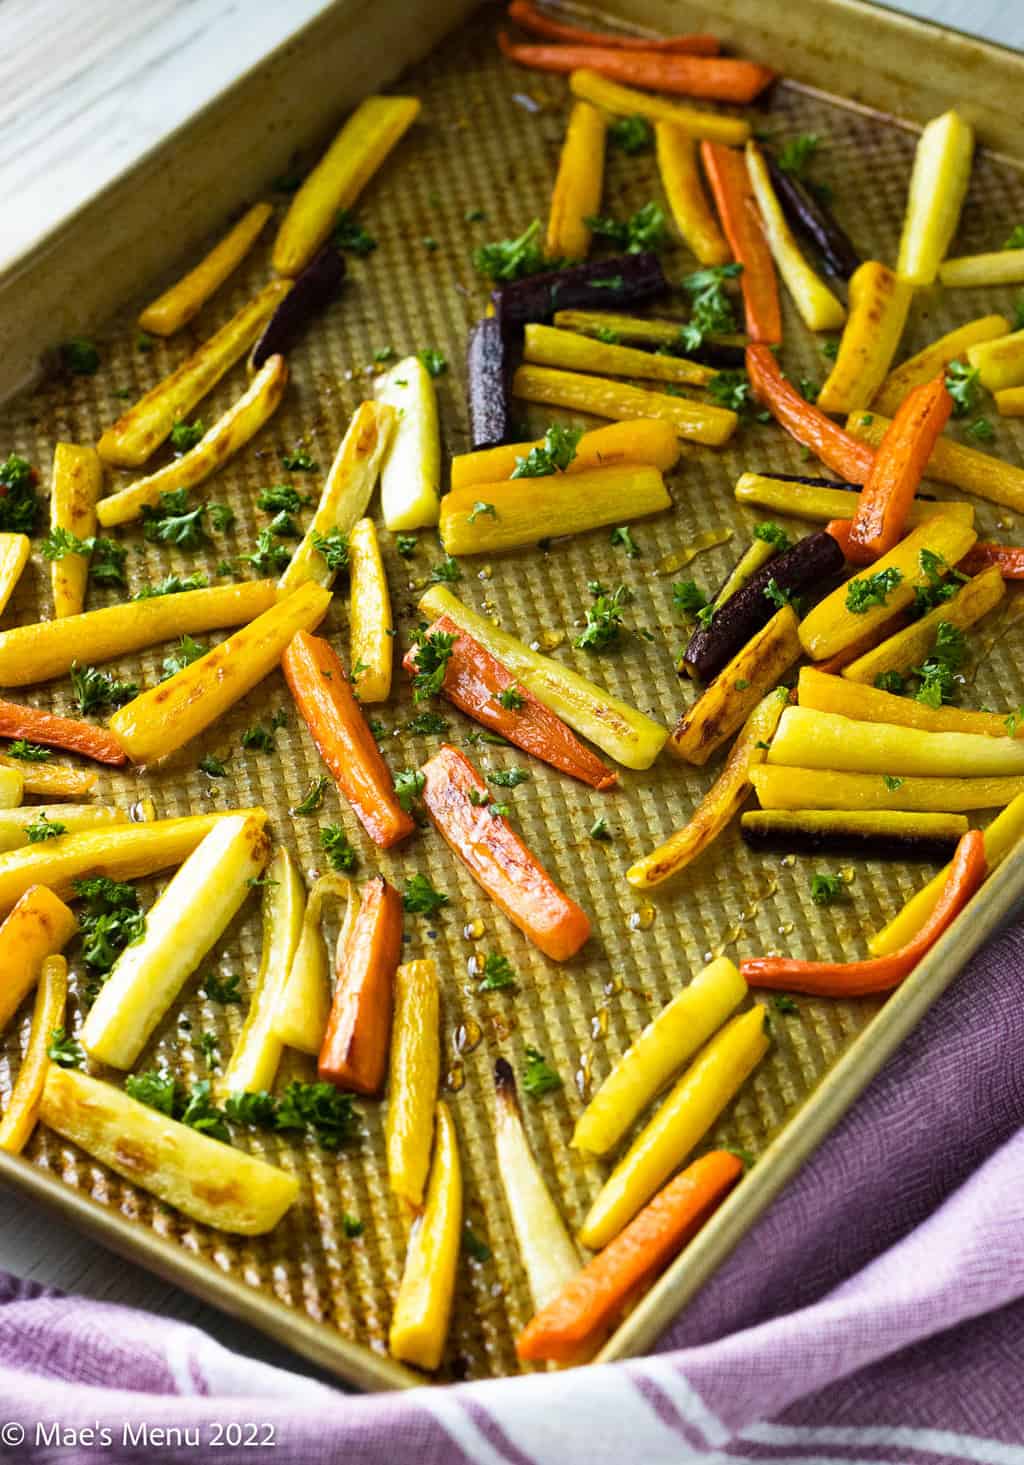 A large roasted pan full of rainbow carrots.